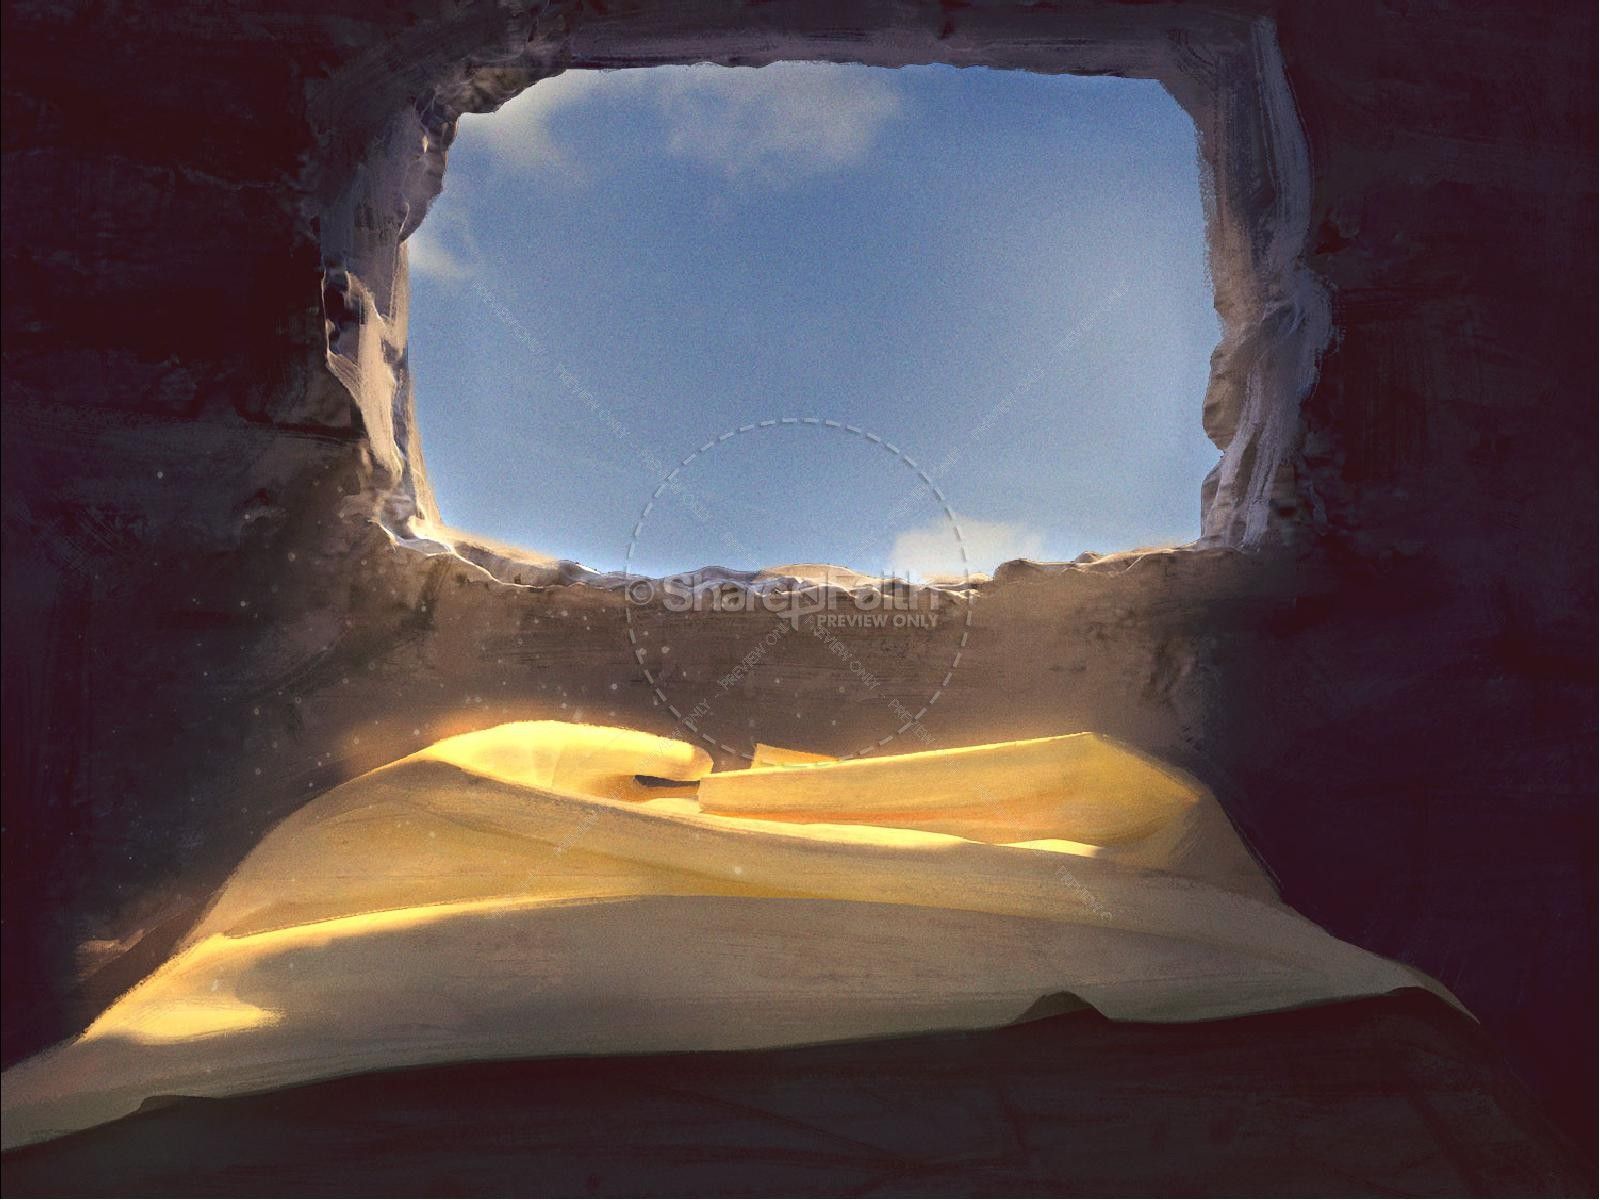 Easter Empty Tomb PowerPoint Background. Awsome PowerPoint Background, Awesome PowerPoint Background and Tablet PowerPoint Background